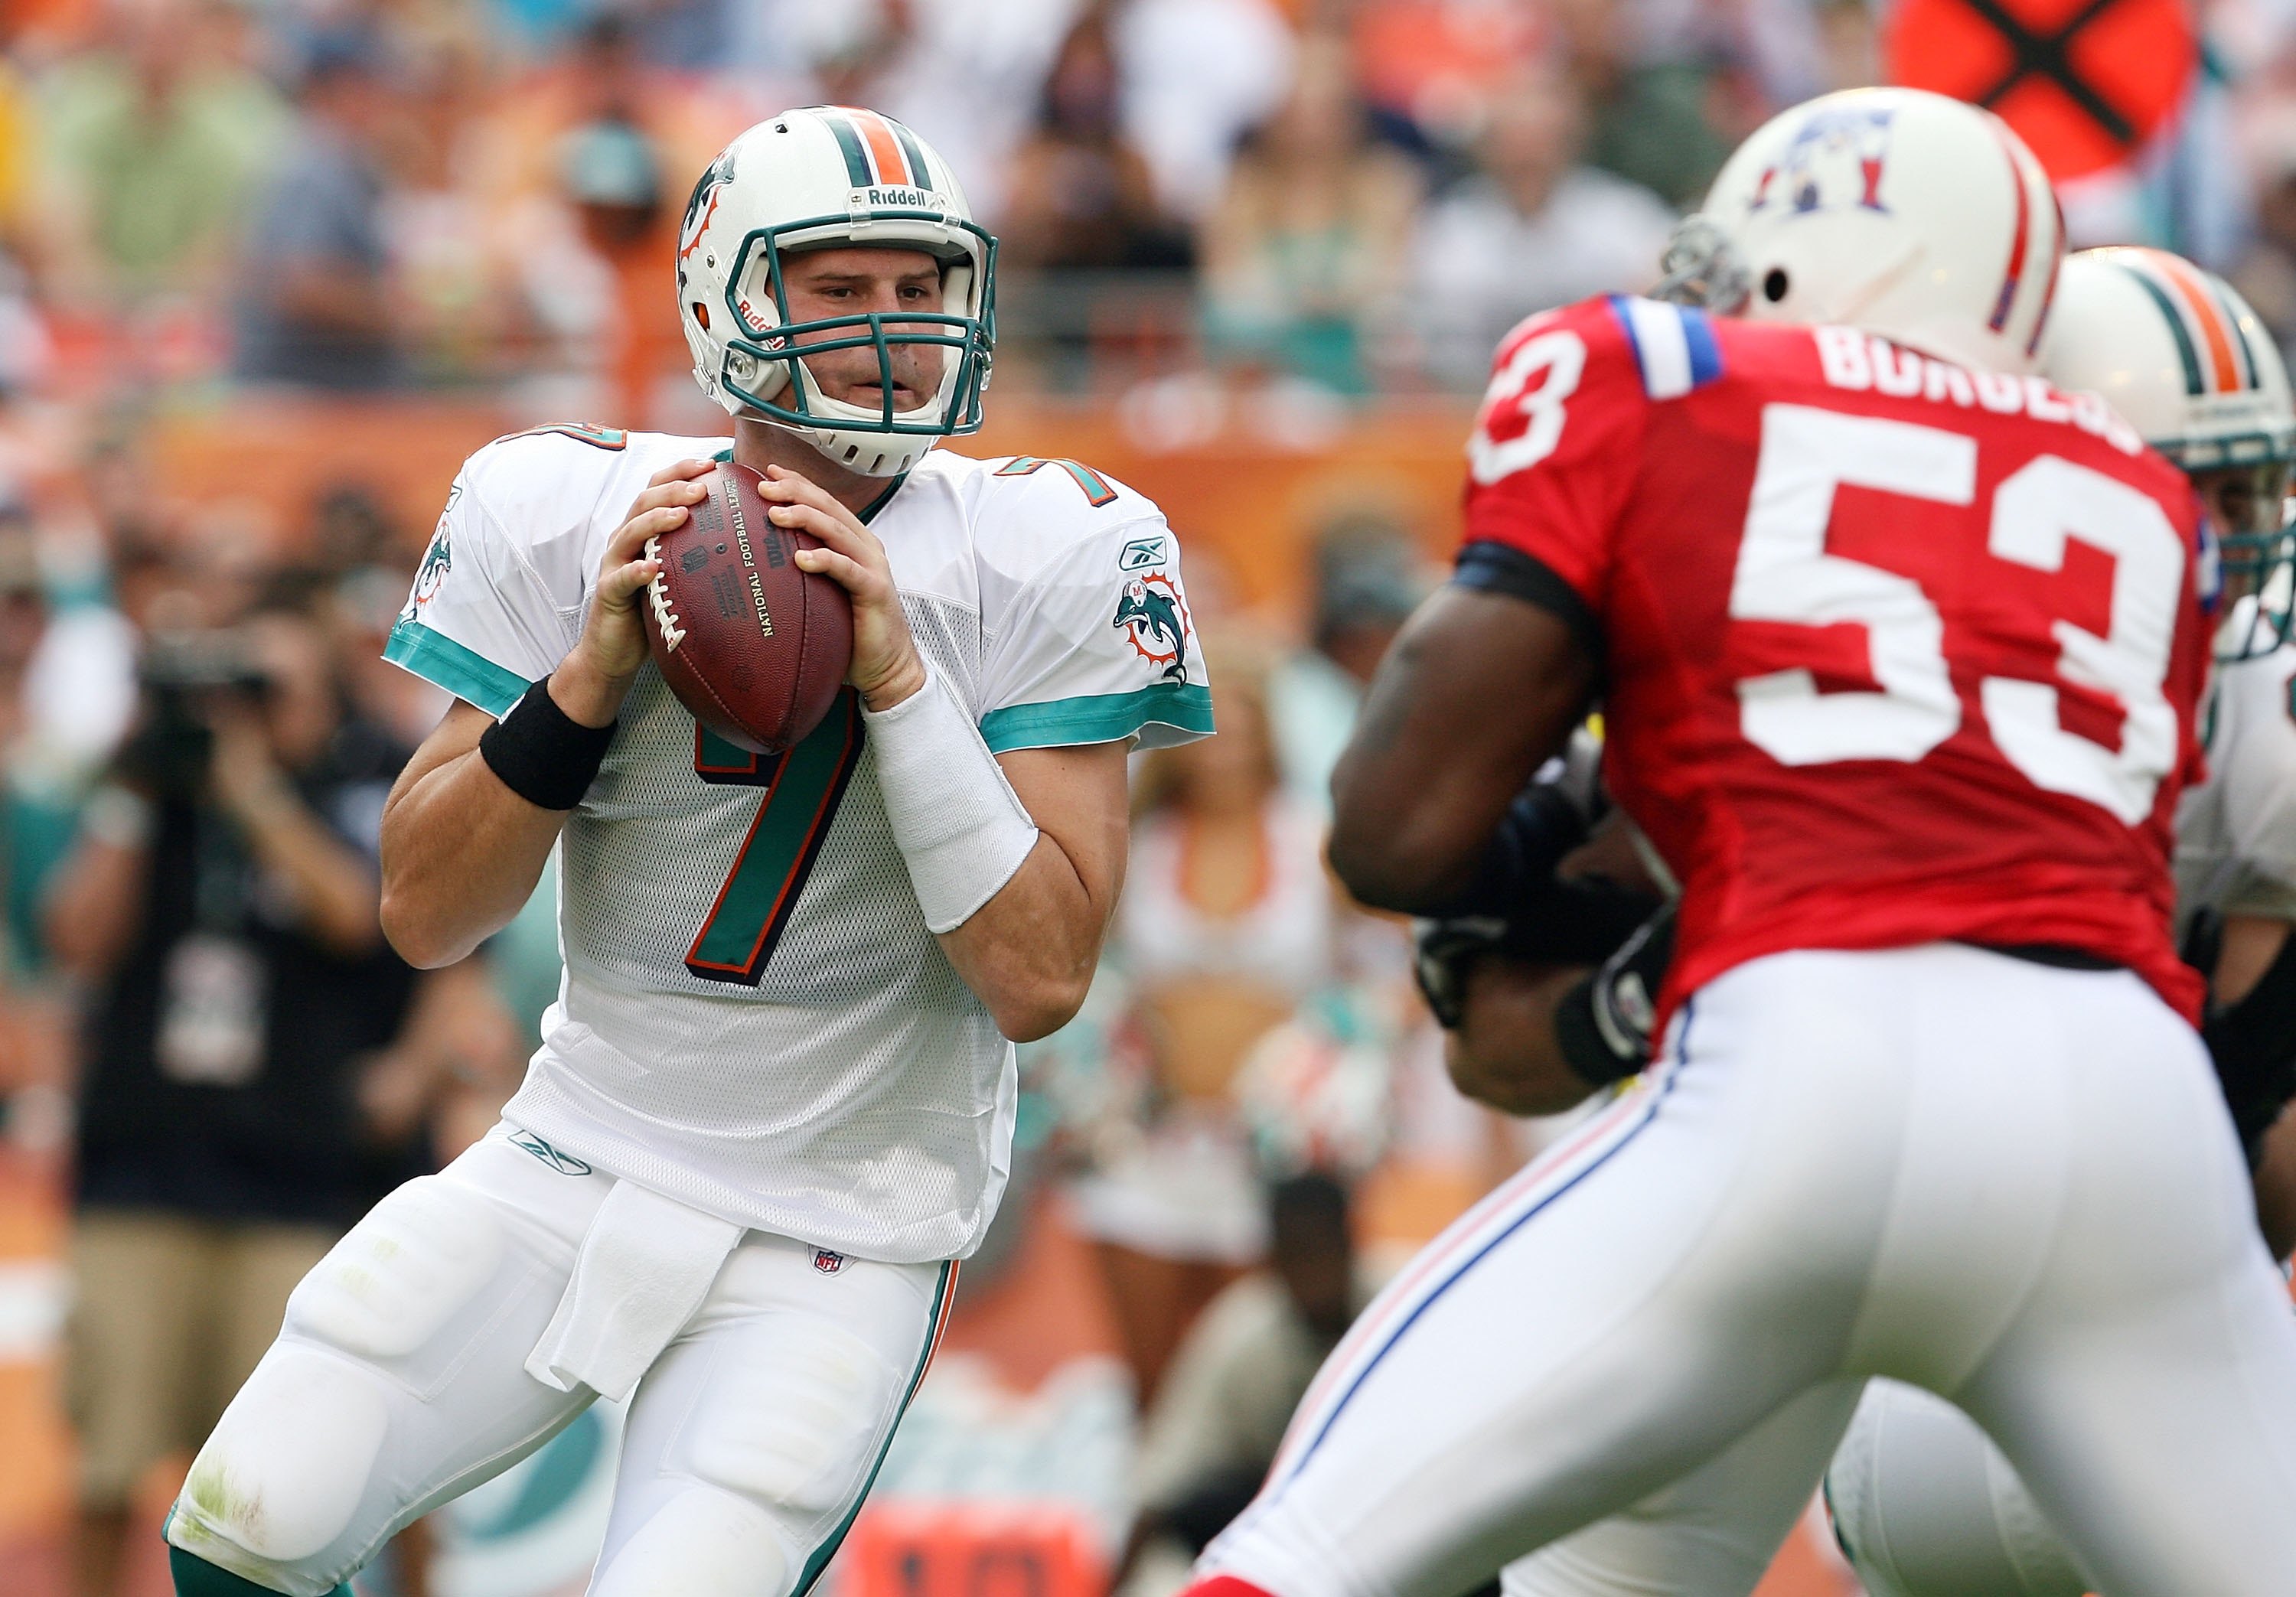 What time is the Miami Dolphins vs. New England Patriots game